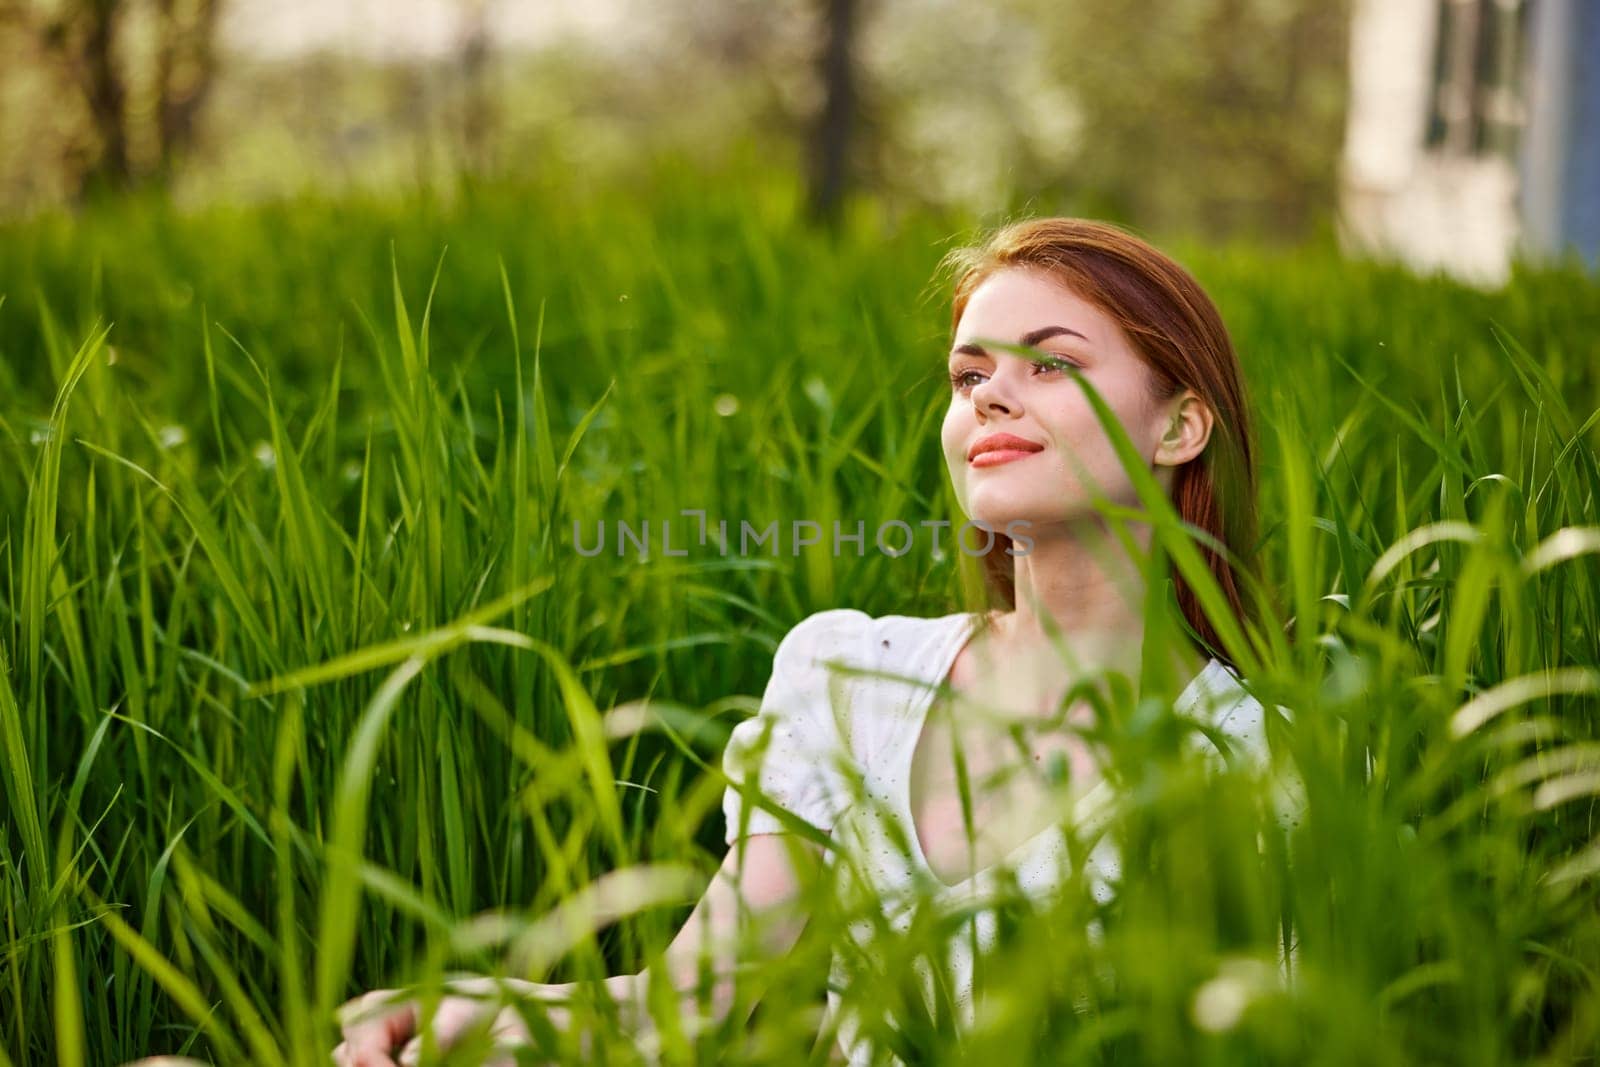 a young woman in a light summer dress enjoys nature sitting in the tall grass. High quality photo